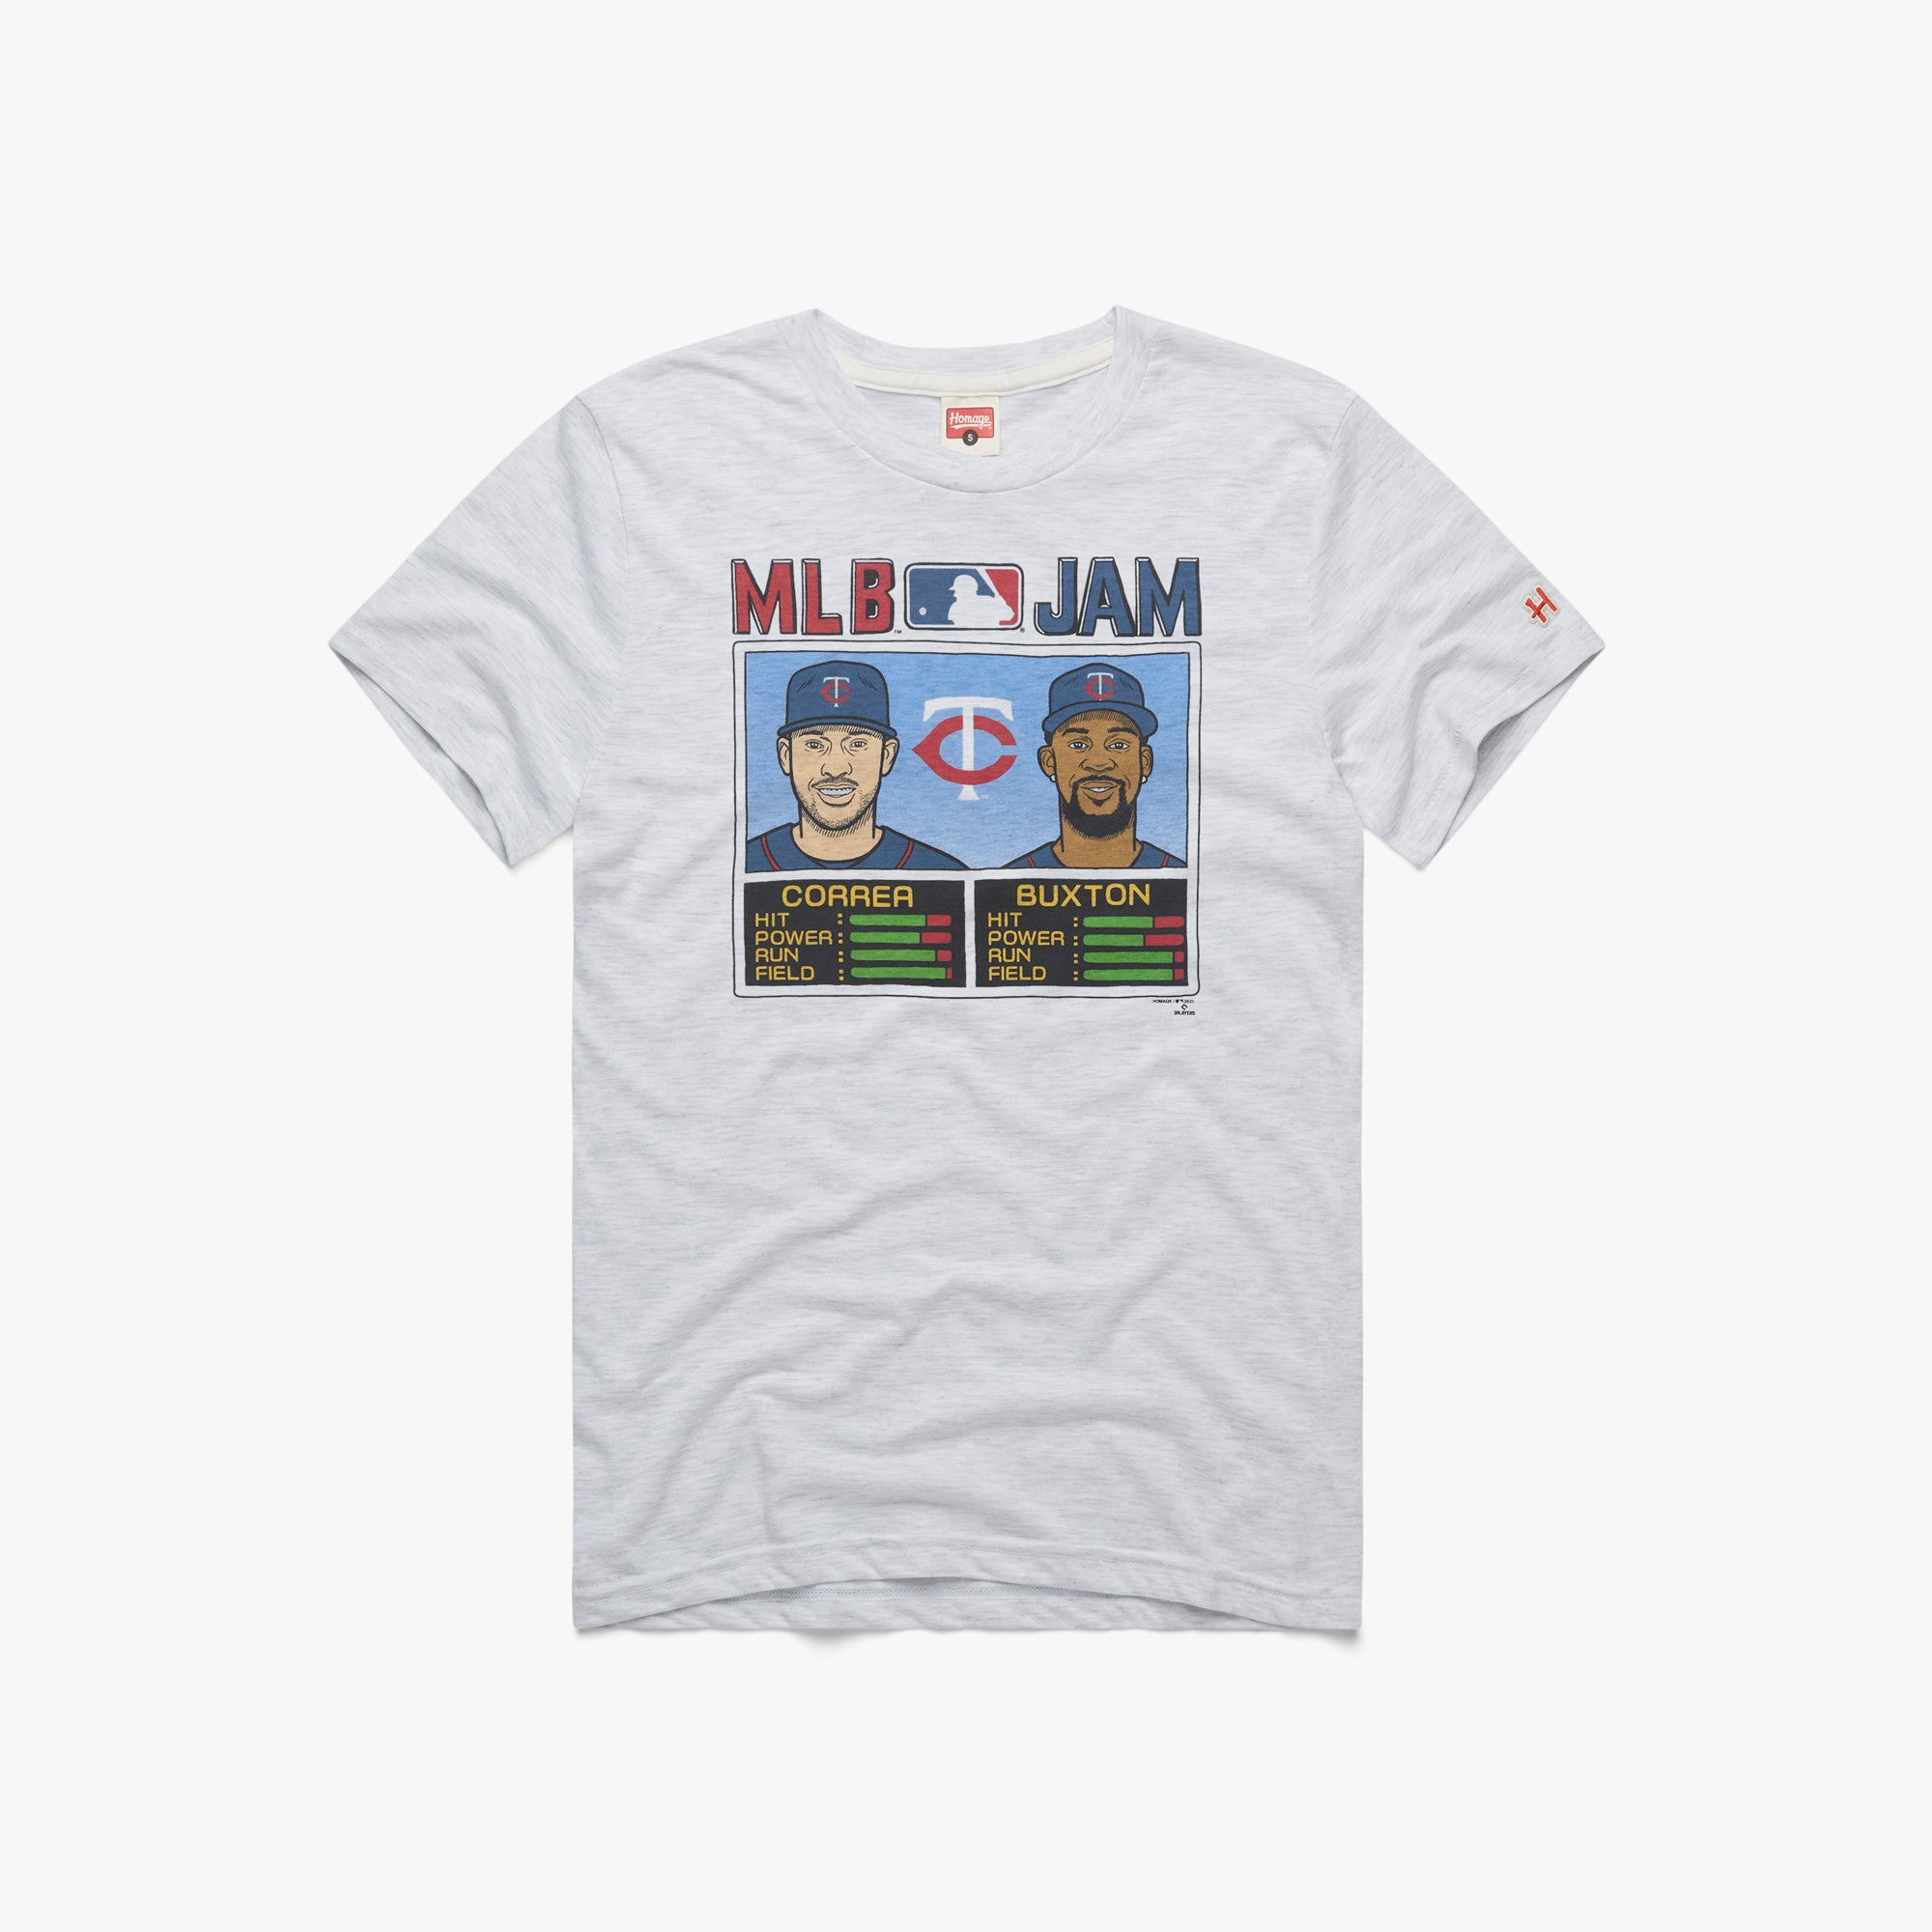 New From HOMAGE: Twins MLB Jam T's